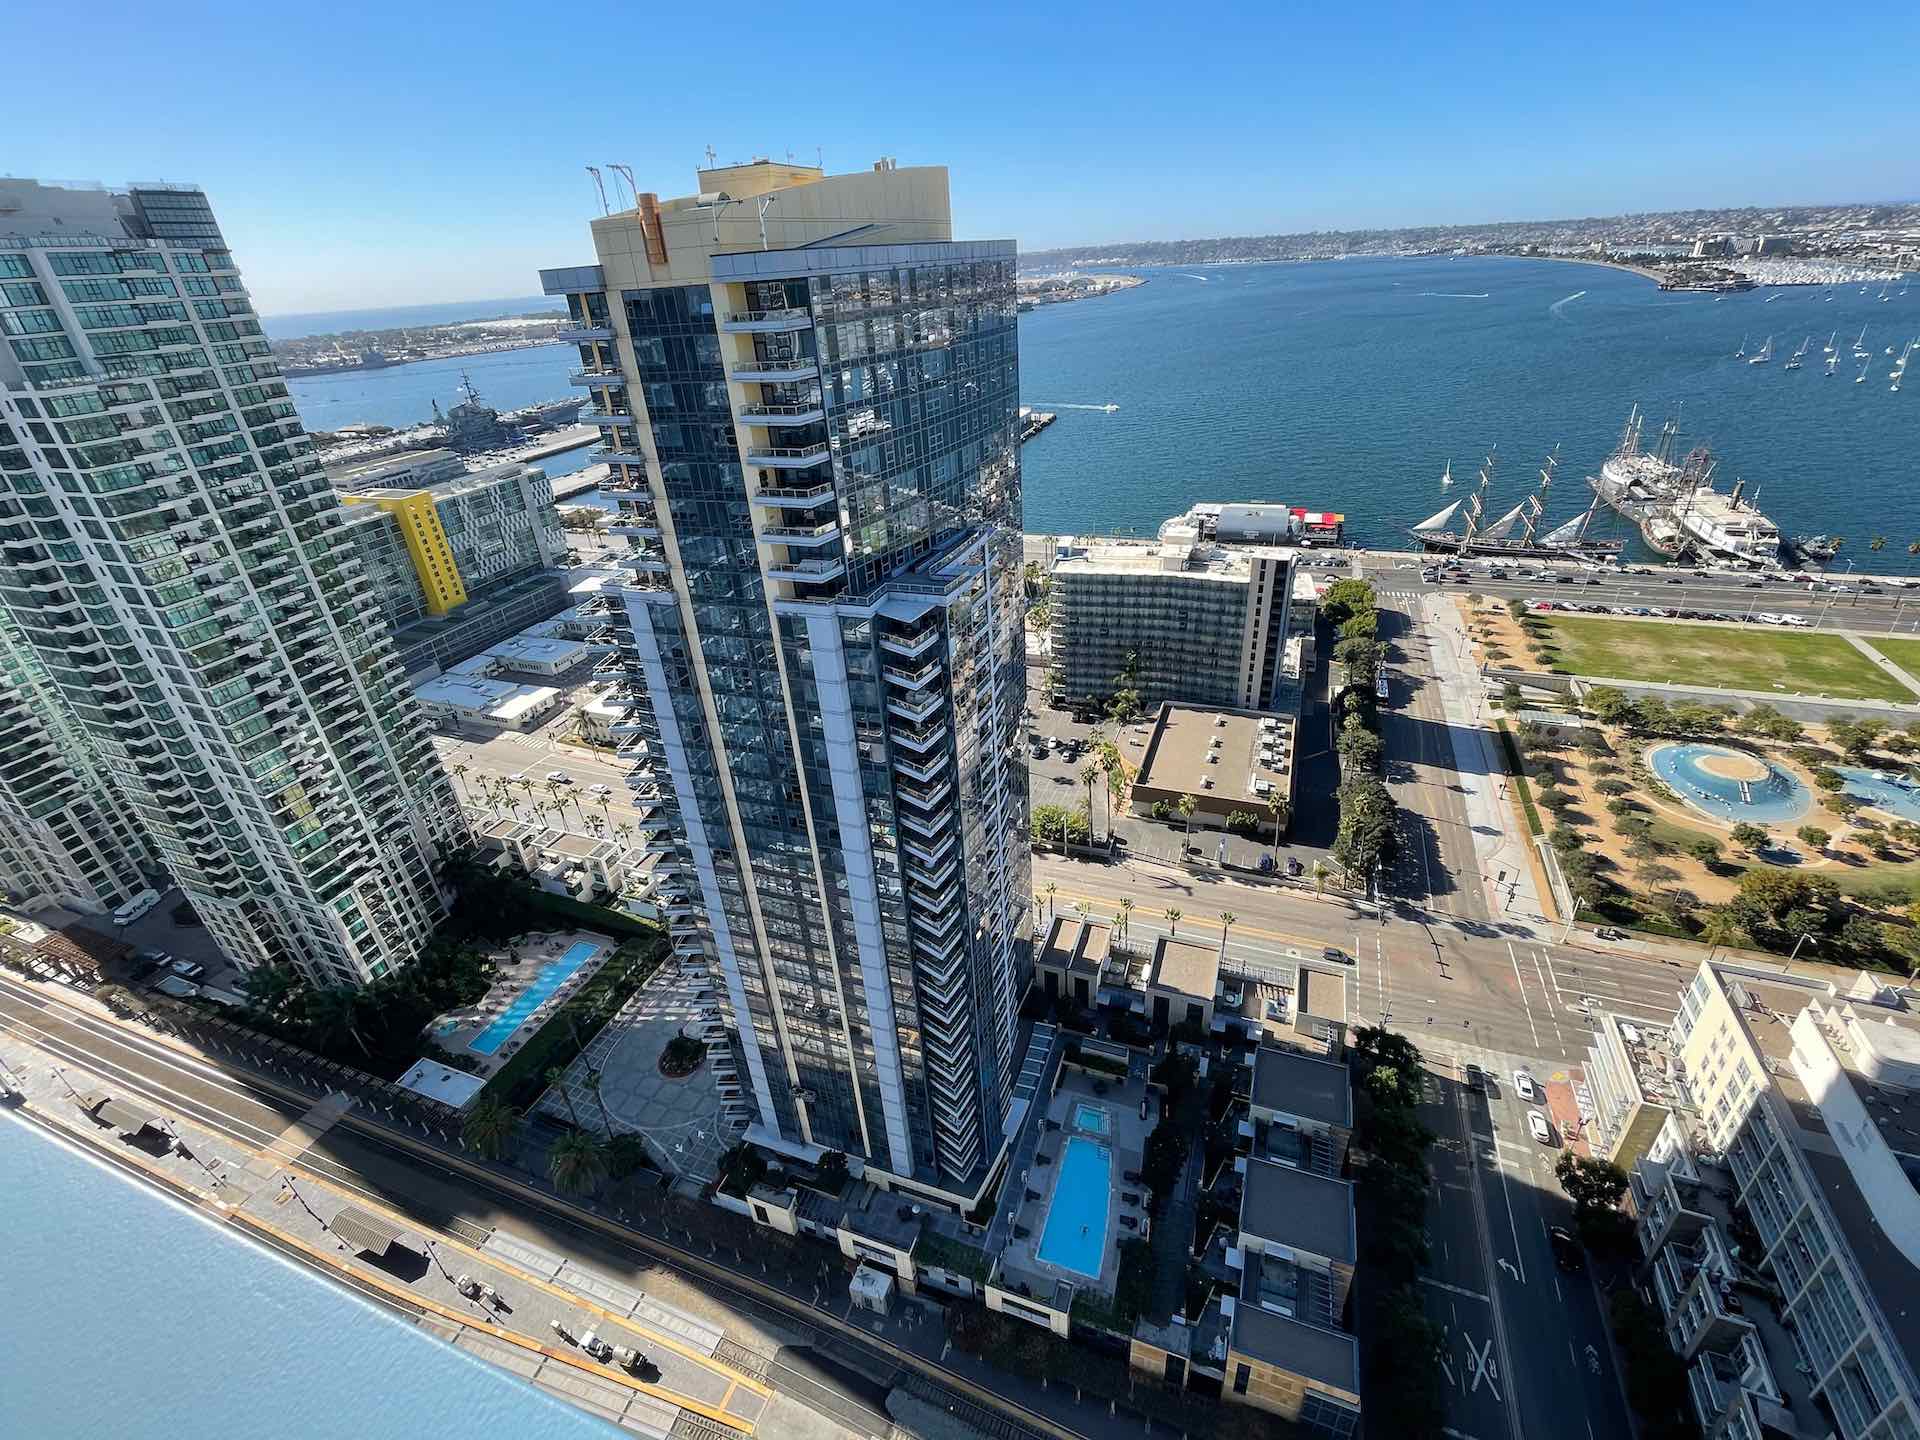 Bayside condo tower in downtown San Diego